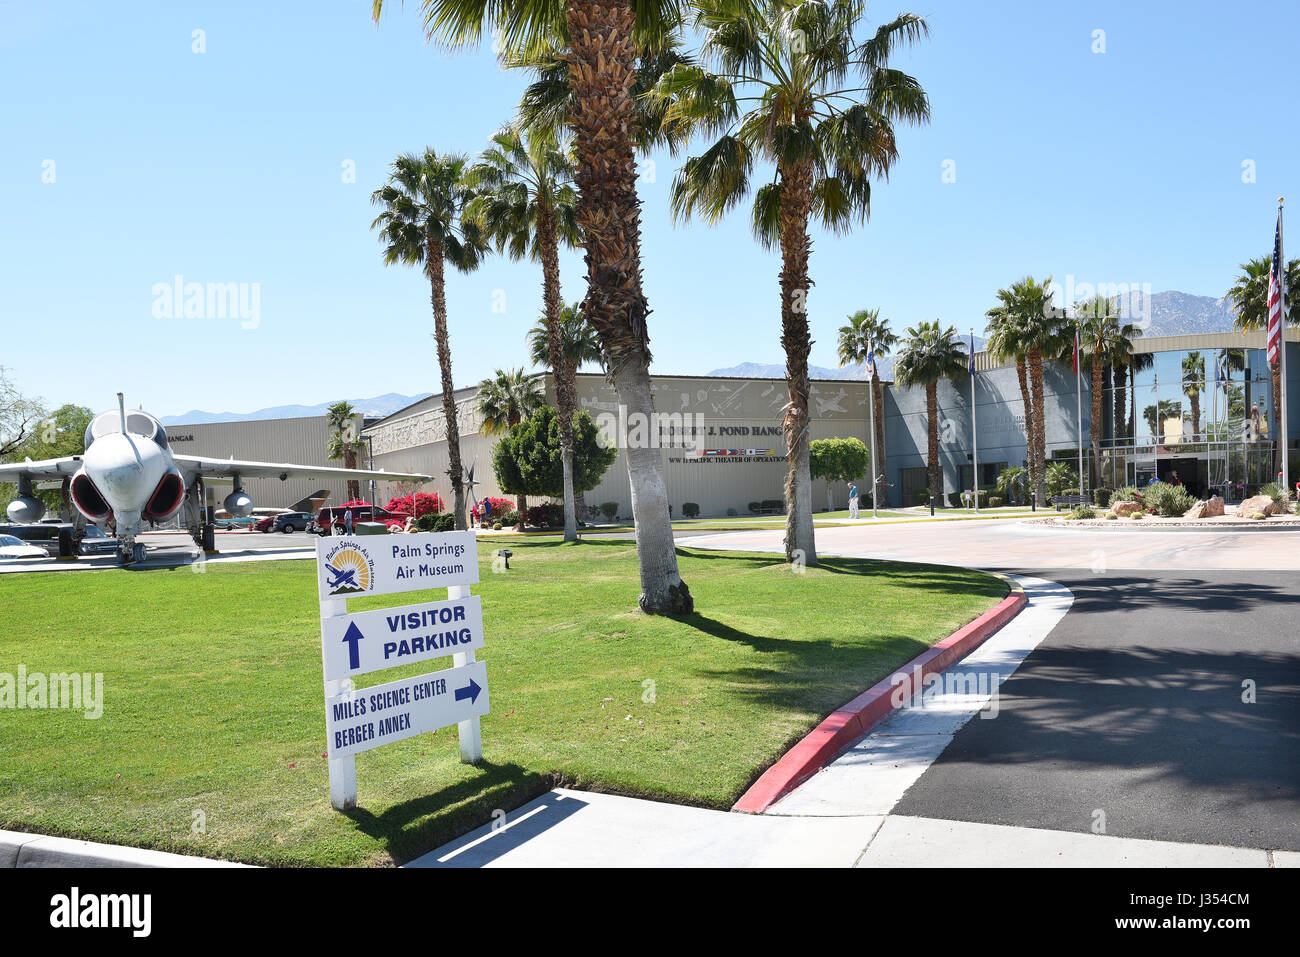 PALM SPRINGS, CA - MARCH 24, 2017: Palm Springs Air Museum sign and vintage jet fighter with entrance in the background. Stock Photo